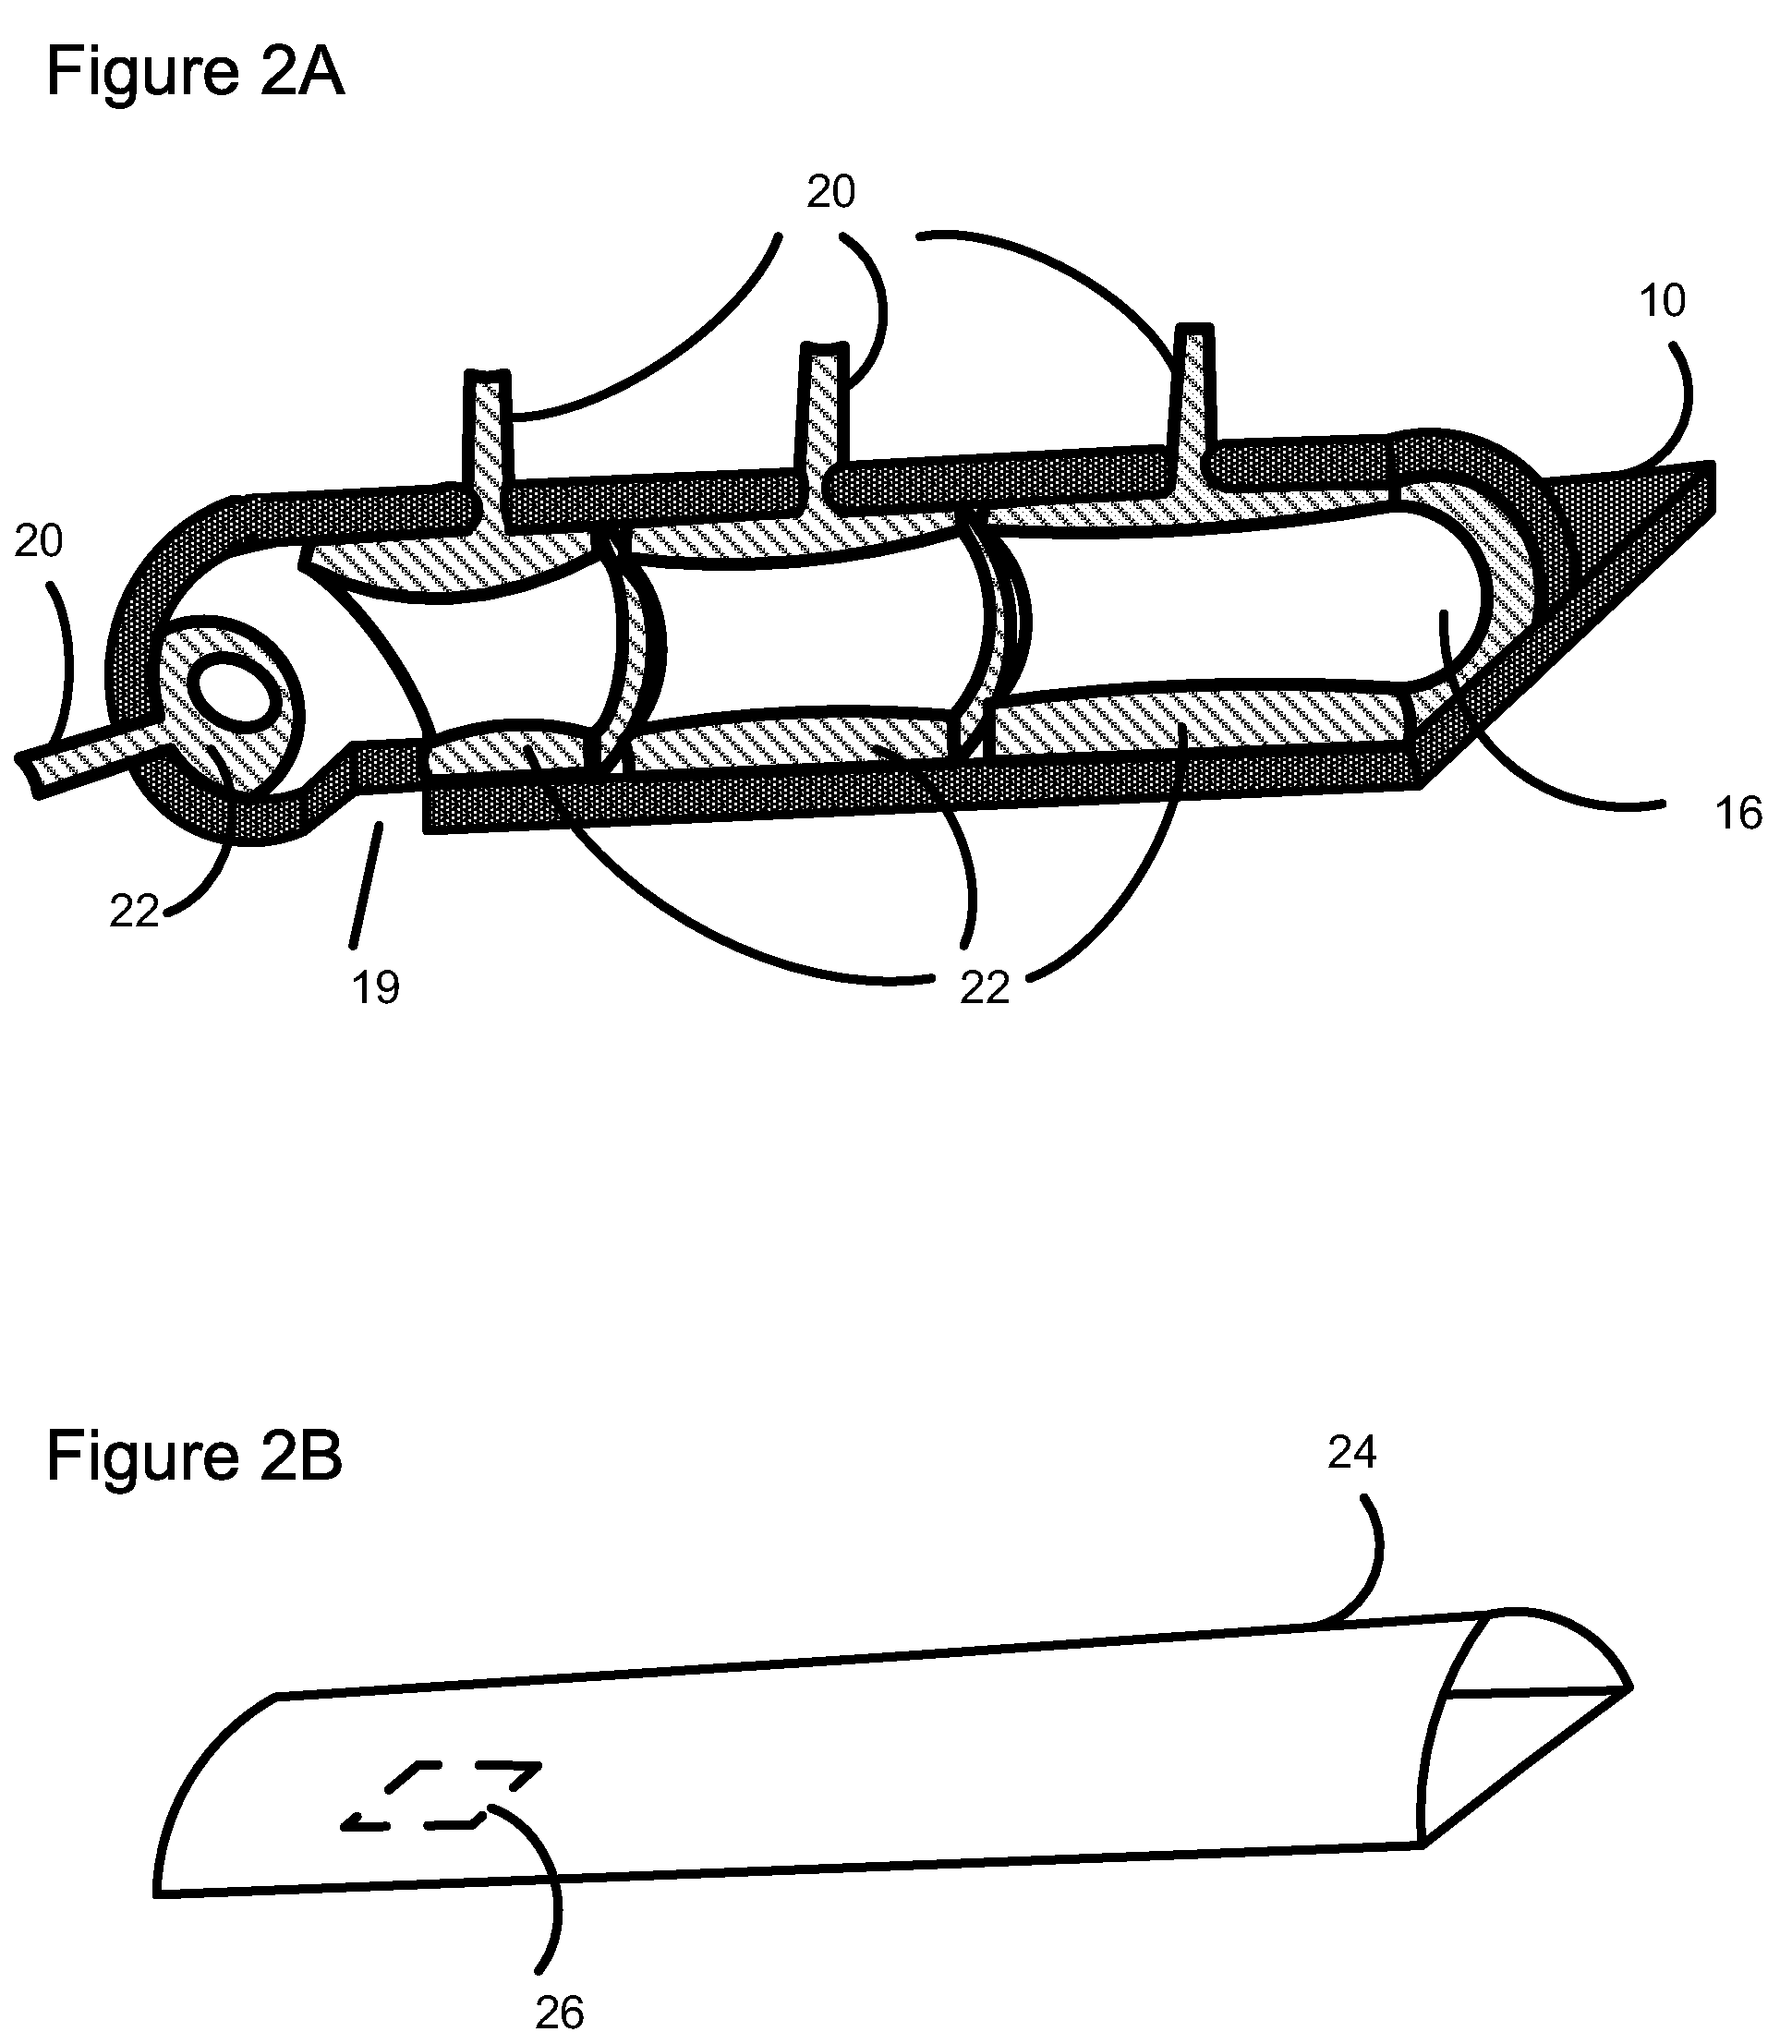 Methods and apparatus for blood sampling